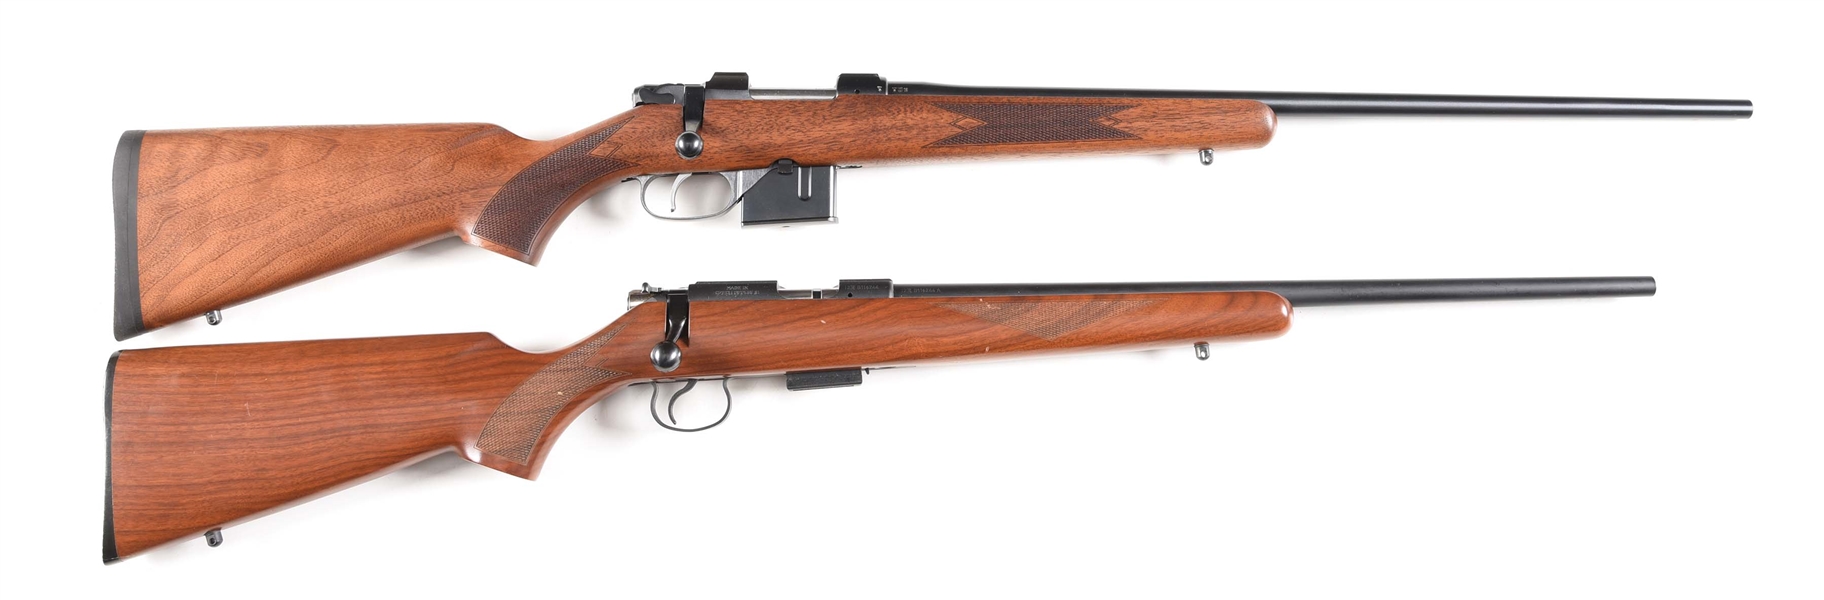 (M) LOT OF 2: CZ 527 AND 455 BOLT ACTION RIFLES.